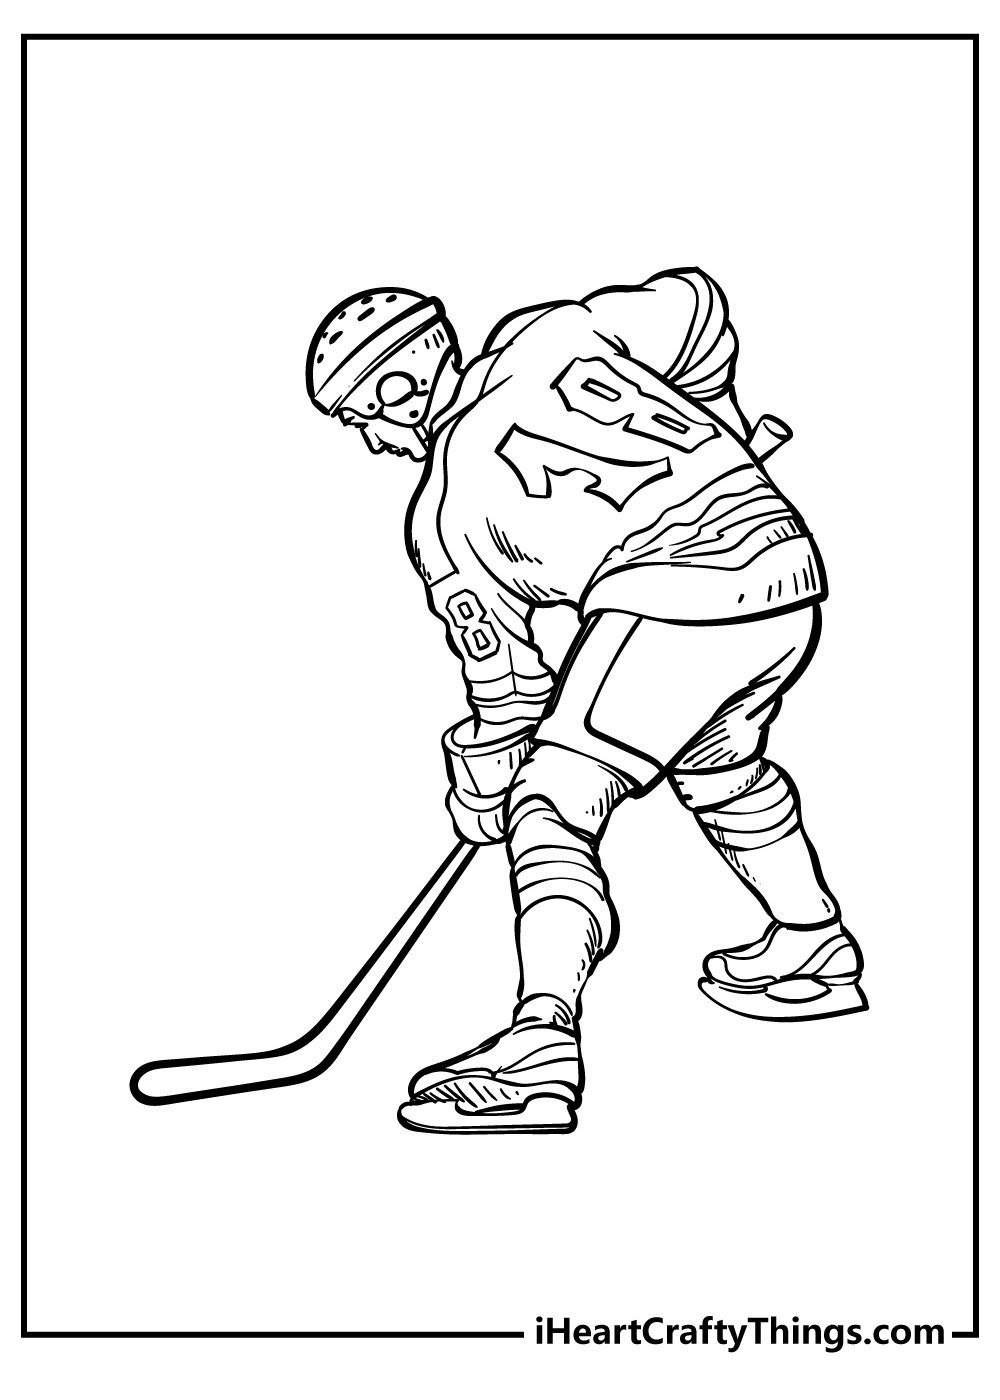 Hockey Coloring Book for adults free download